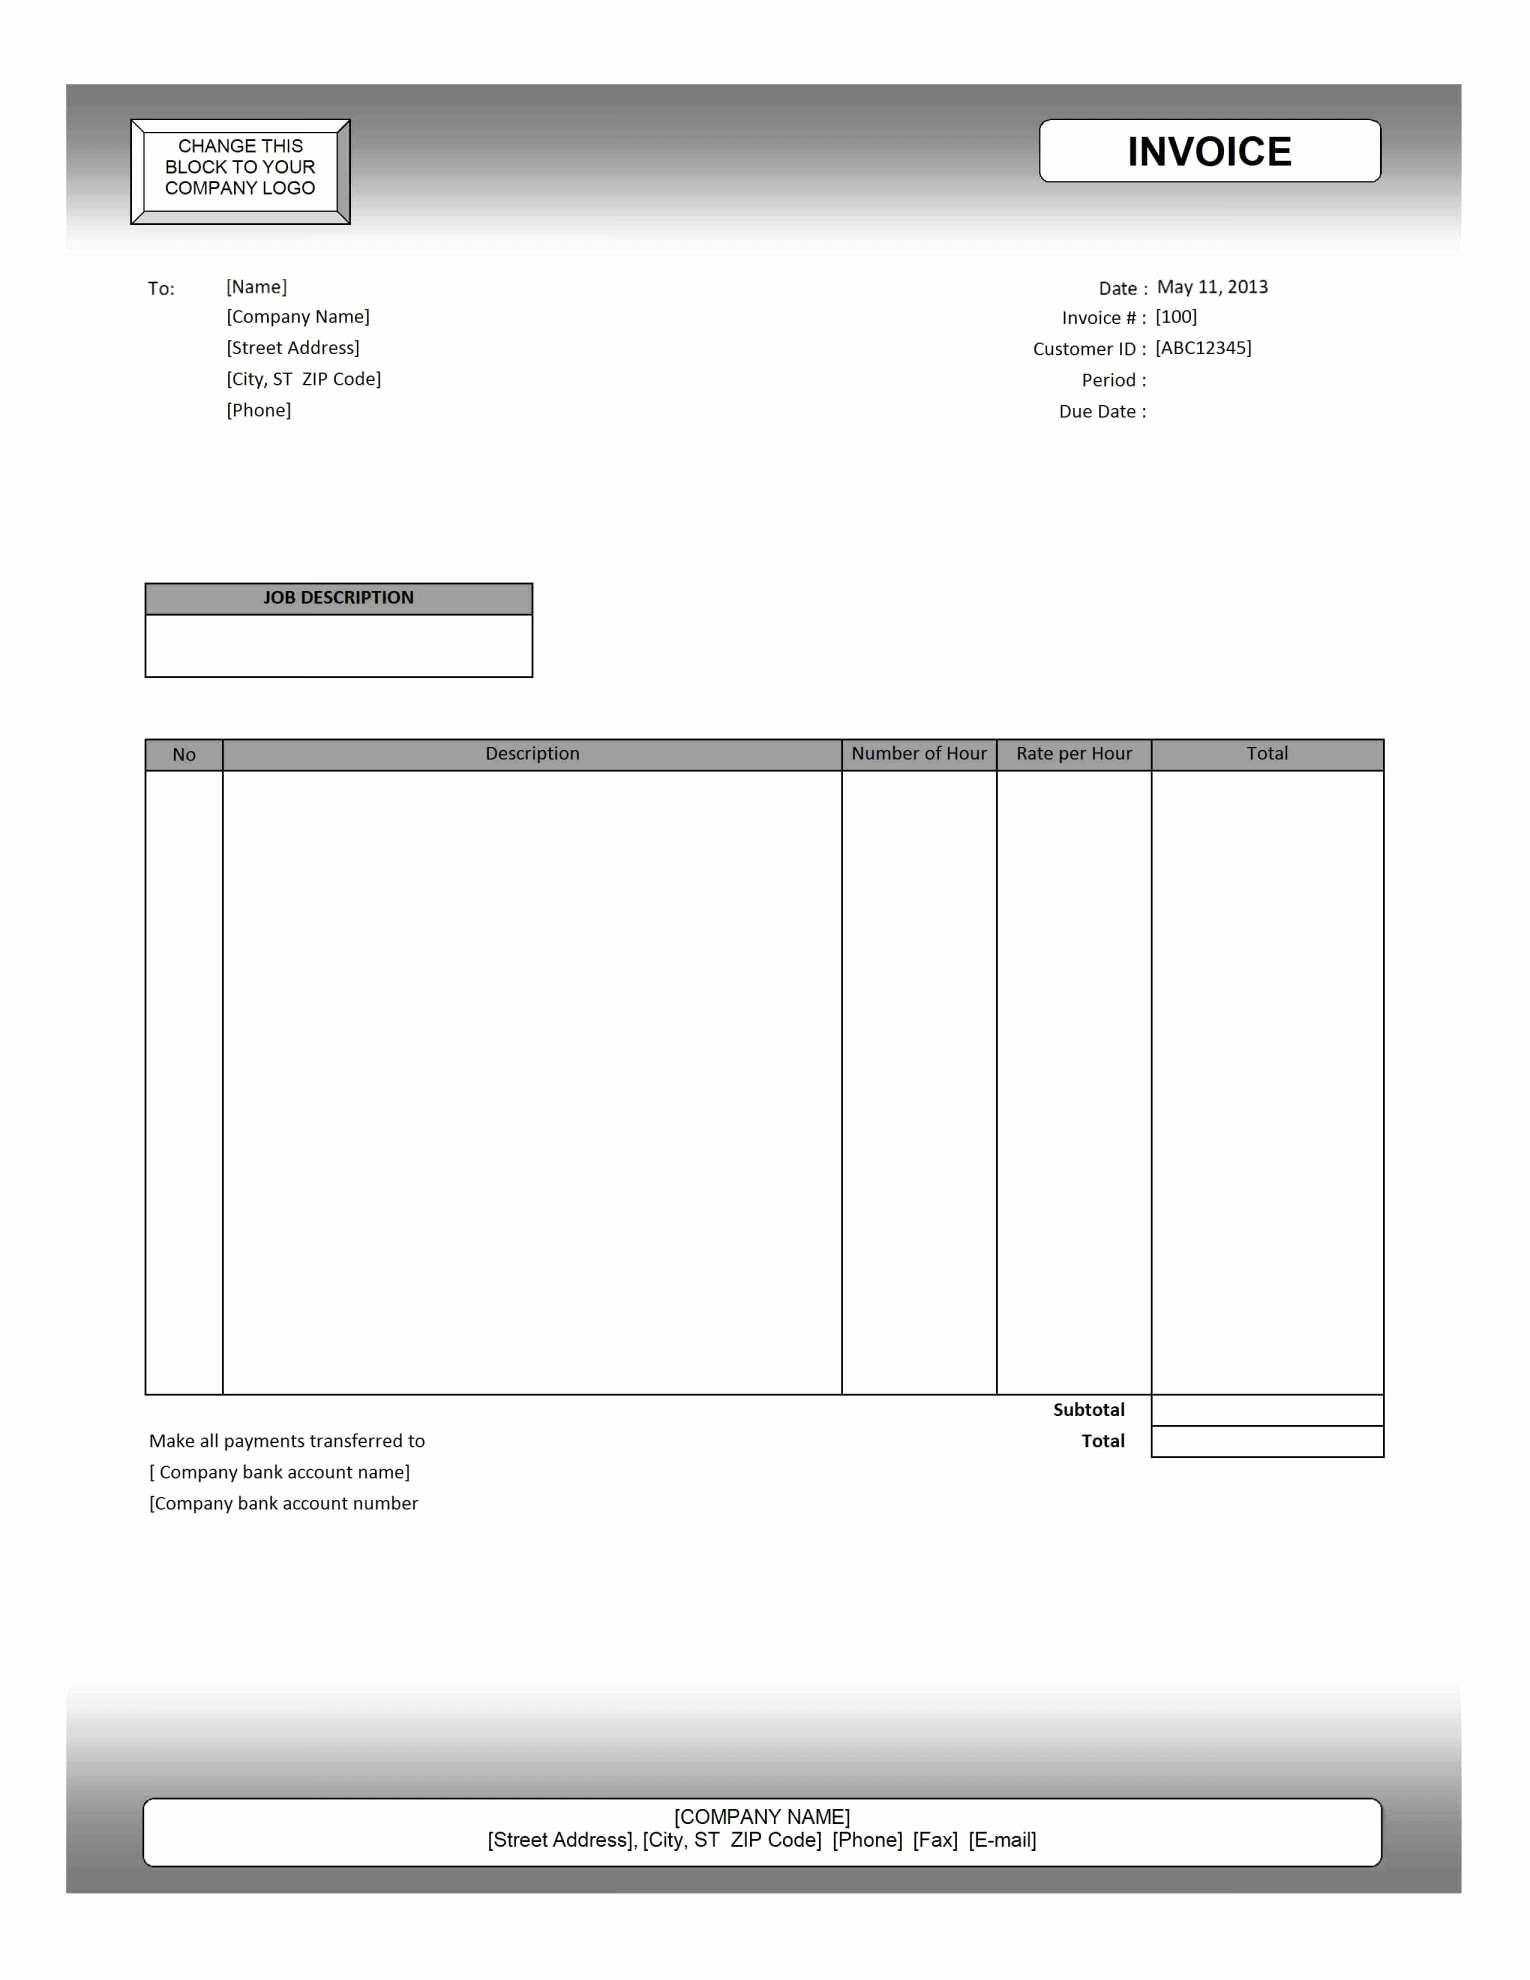 Download Invoice Template for Mac Best Of Invoice Templates for Mac Expense Spreadshee Invoice